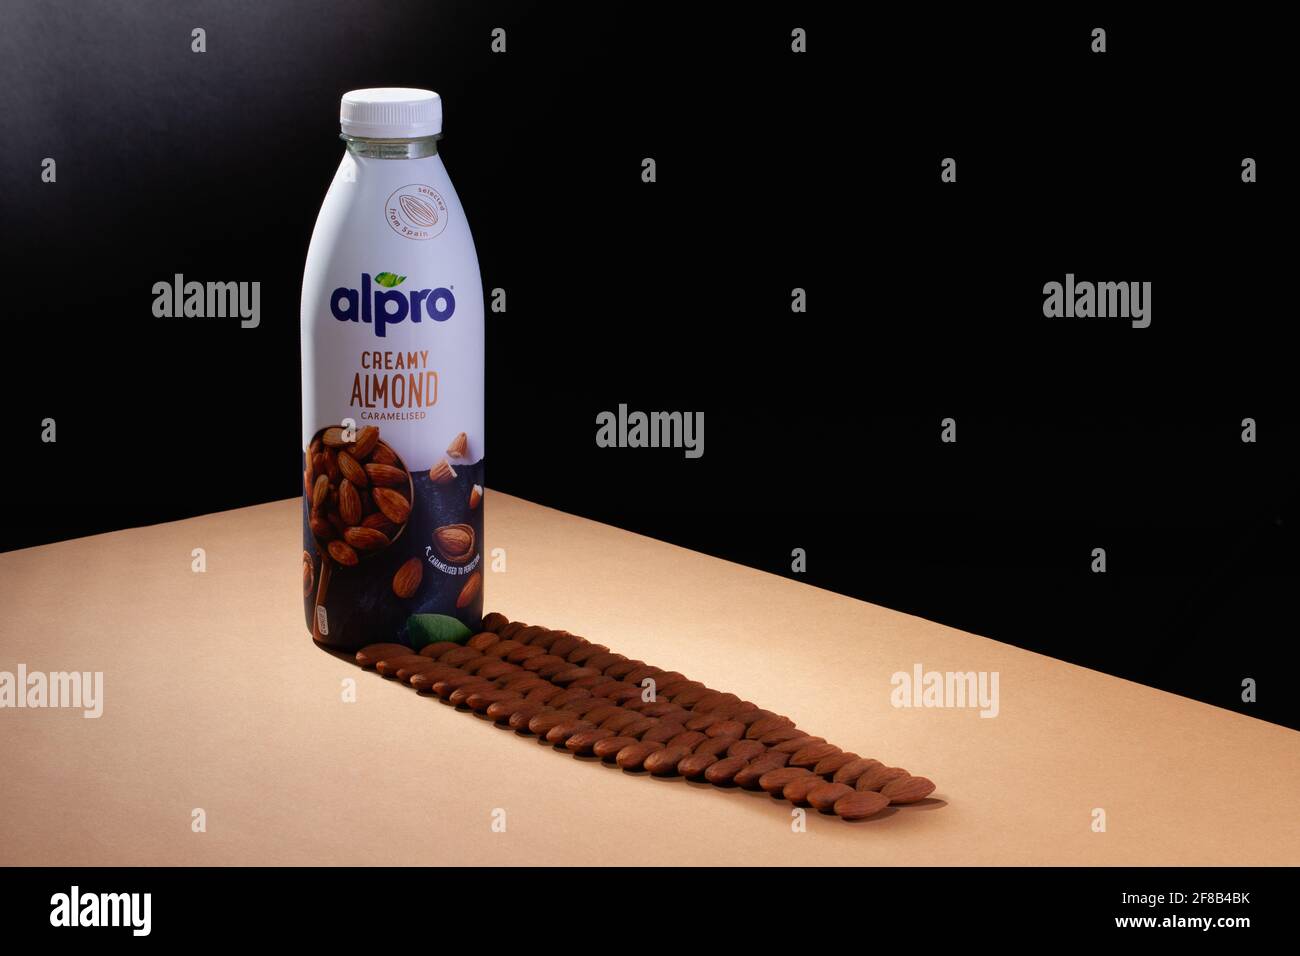 on markets and March,2021: - is company of drink Prague,Czech almond organic Republic a almonds - Photo table. 22 shadow that brown the Alpro Stock Alpro European Alamy